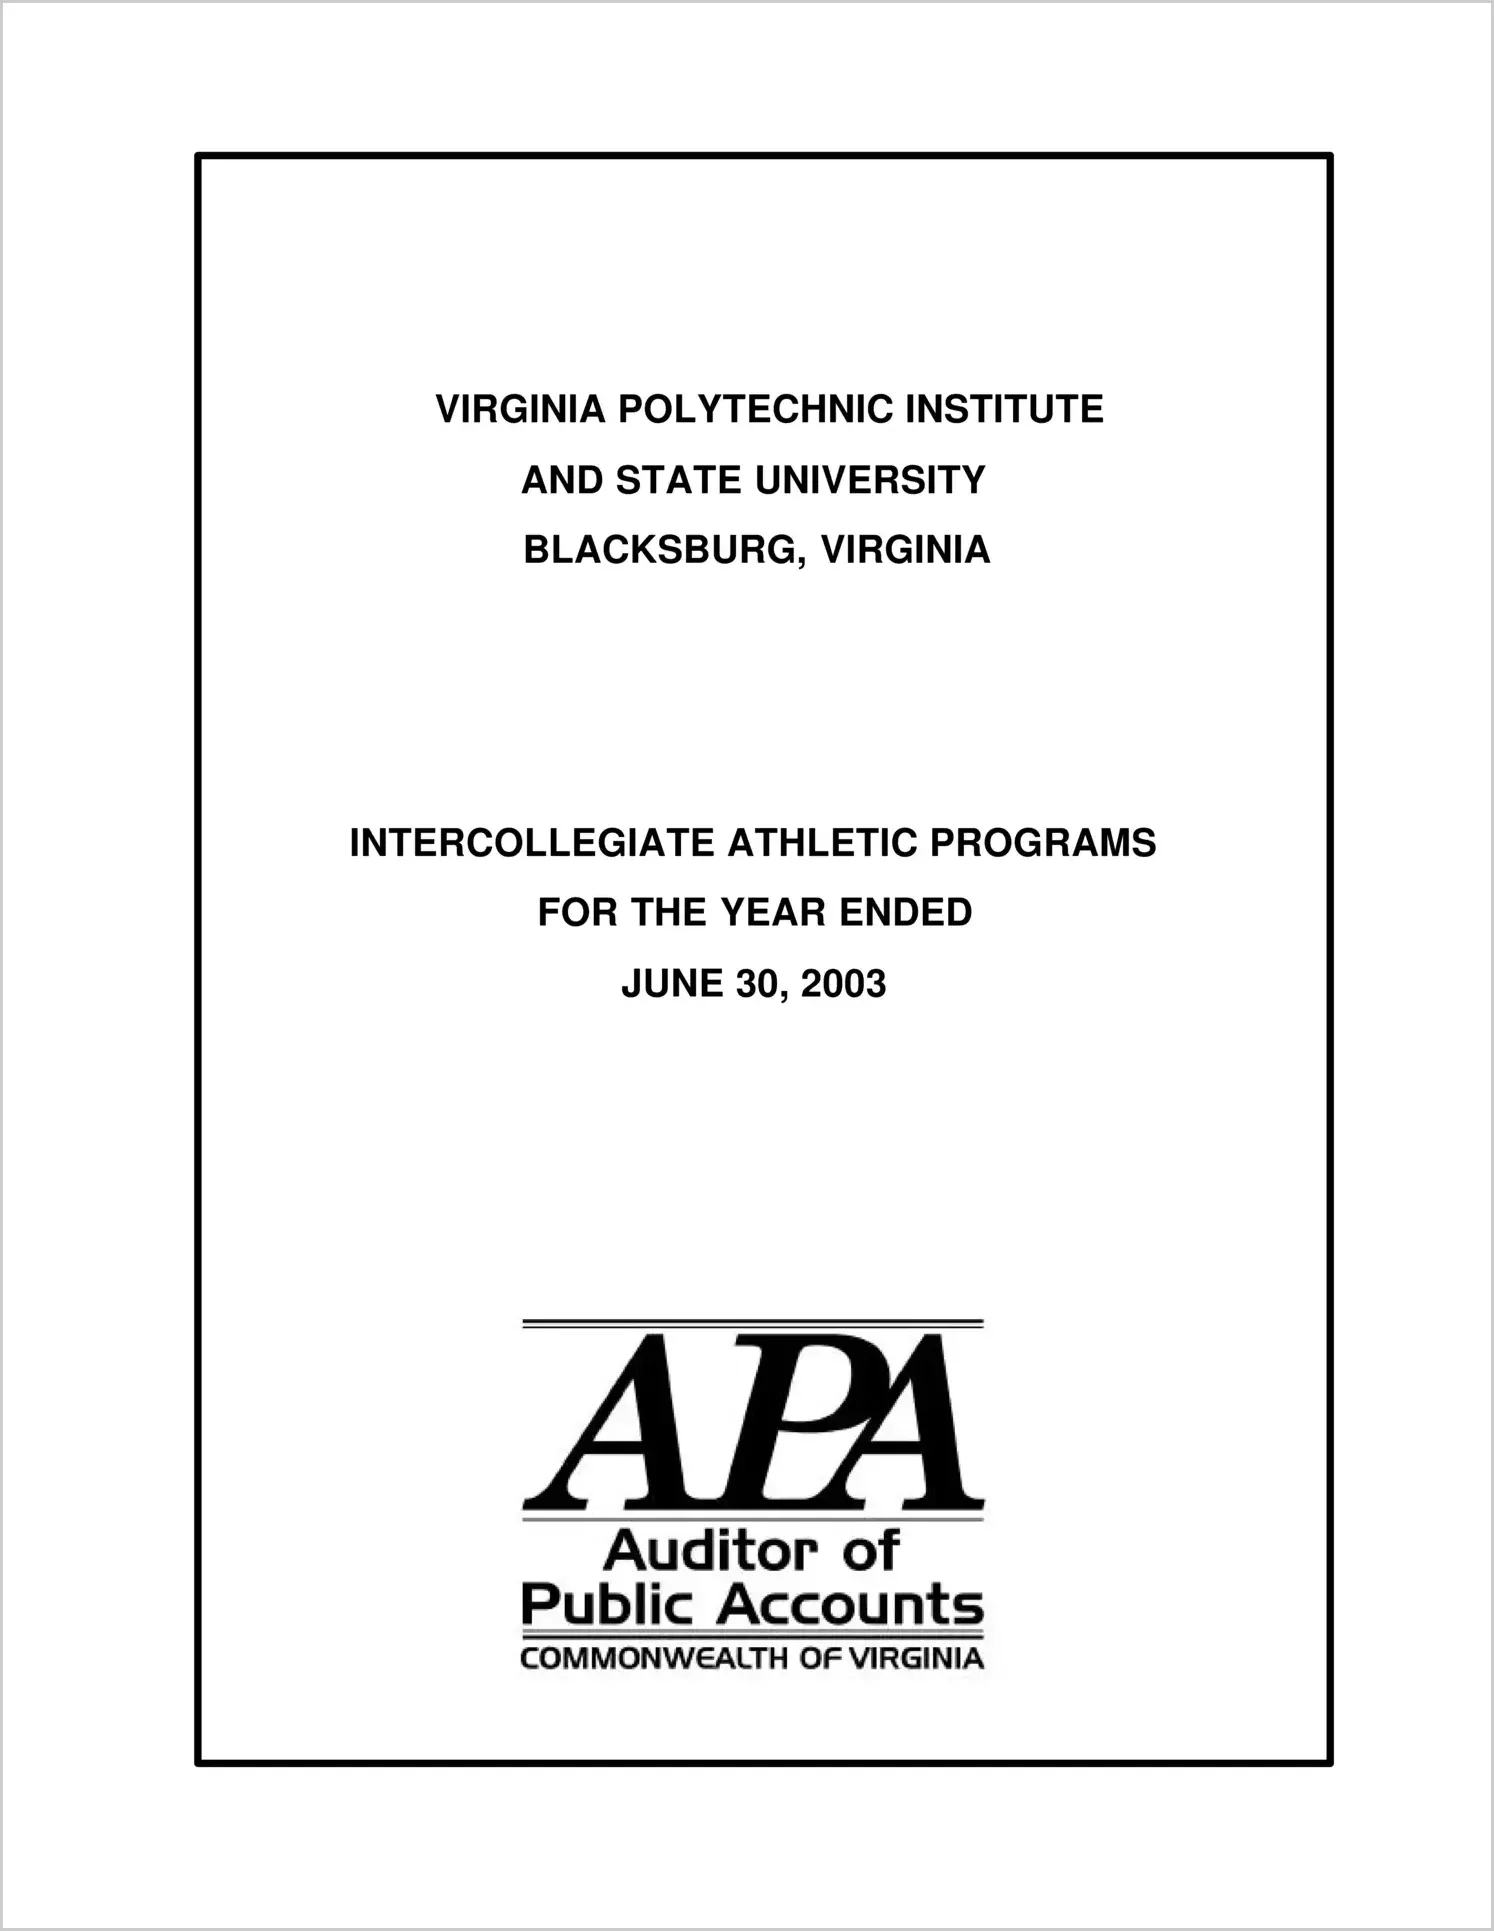 Virginia Polytechnic Institute and State University Intercollegiate Athletic Programs for the year ended June 30, 2003